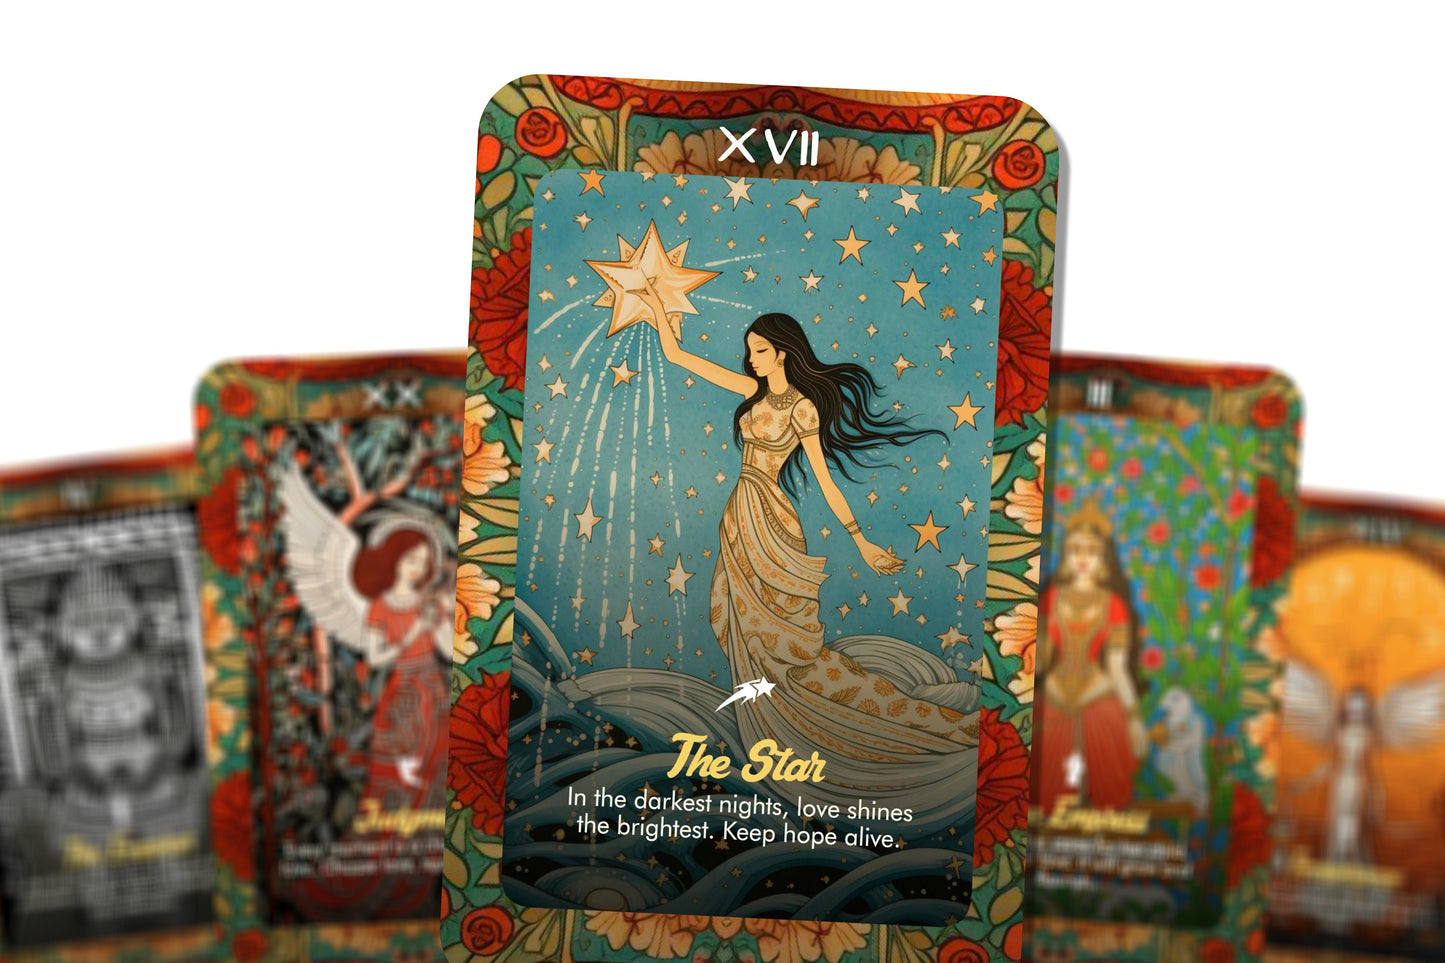 The Intuitive love Tarot - The Cards Know What the Heart Feels - Major Arcana - Divination tools